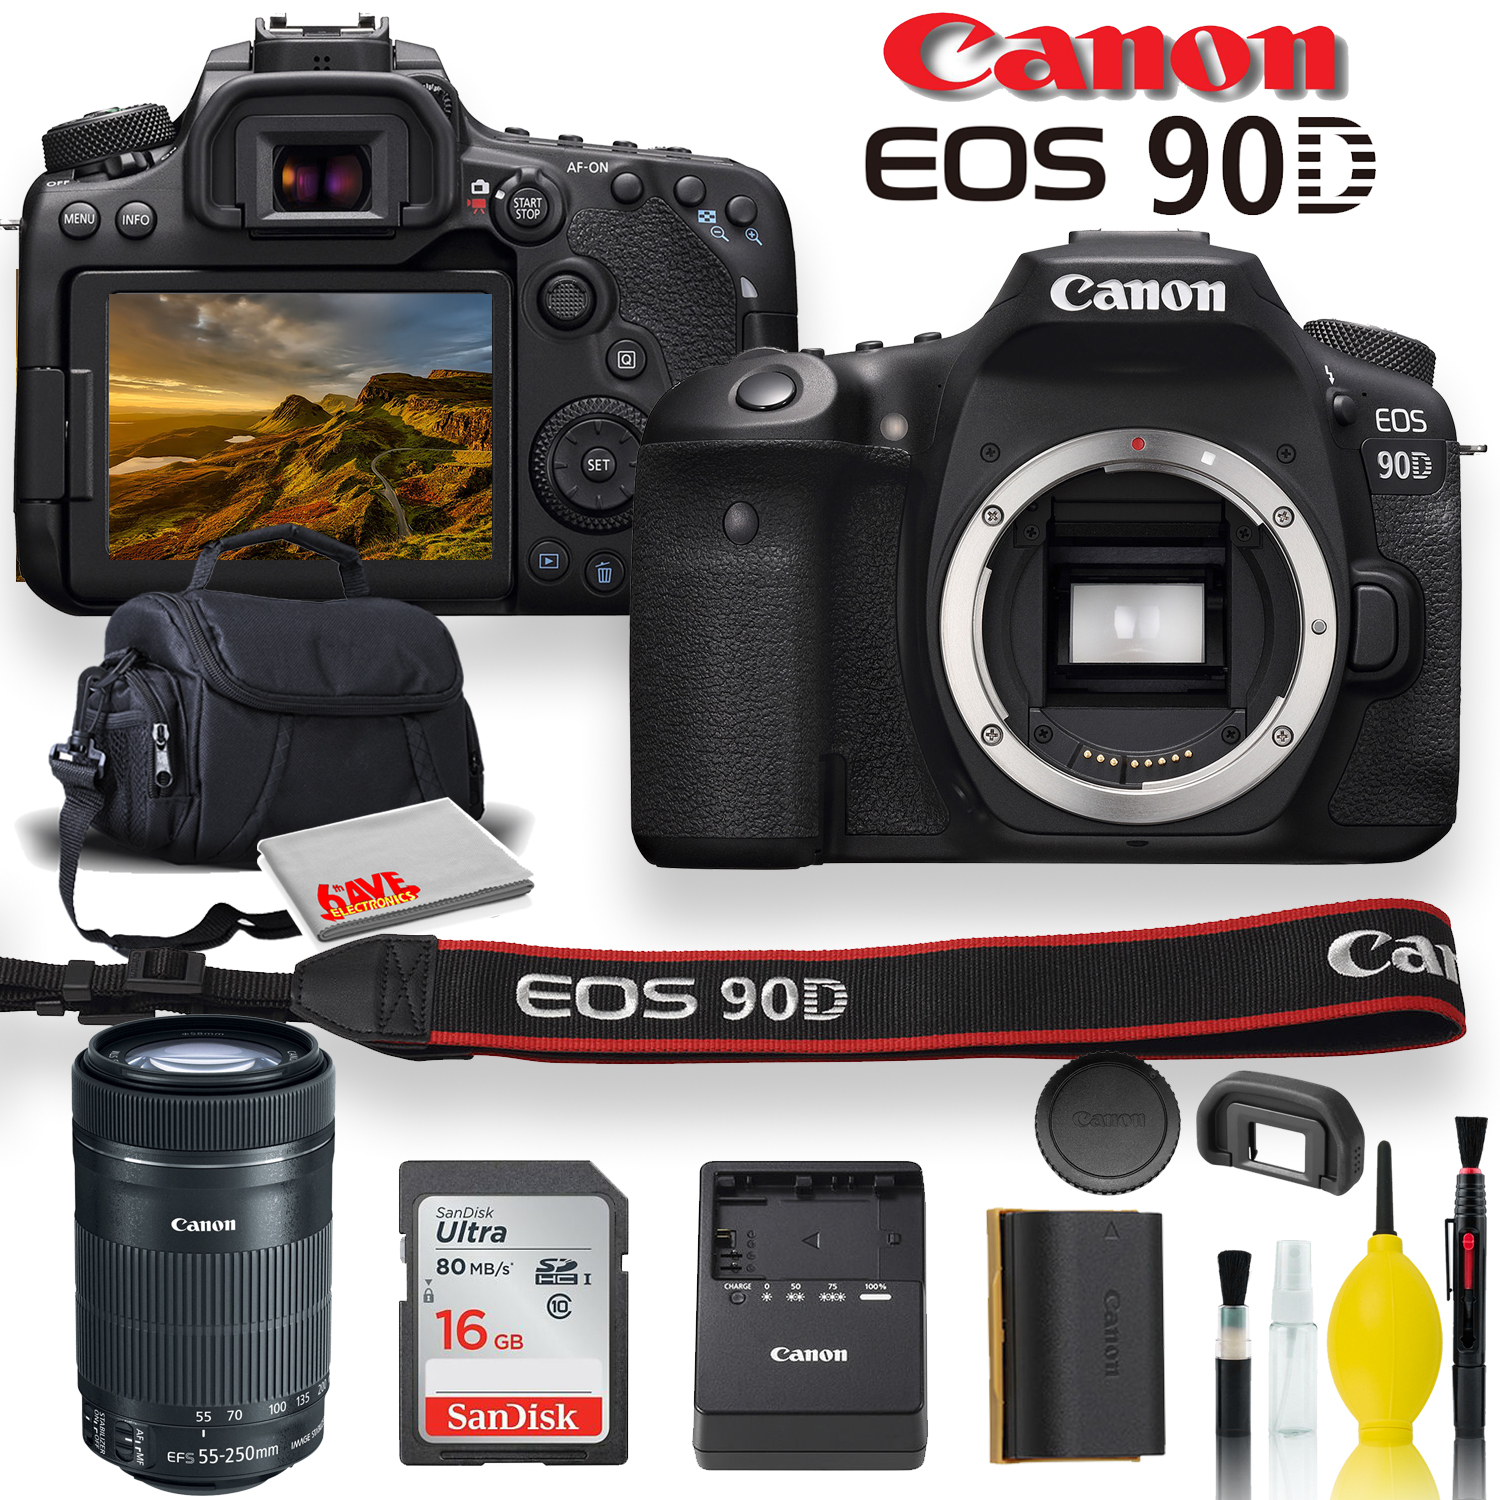 Canon EOS 90D DSLR Camera With Canon EF-S 55-250mm f/4-5.6 IS STM Lens, Soft Padded Case, Memory Card, and More - image 1 of 5